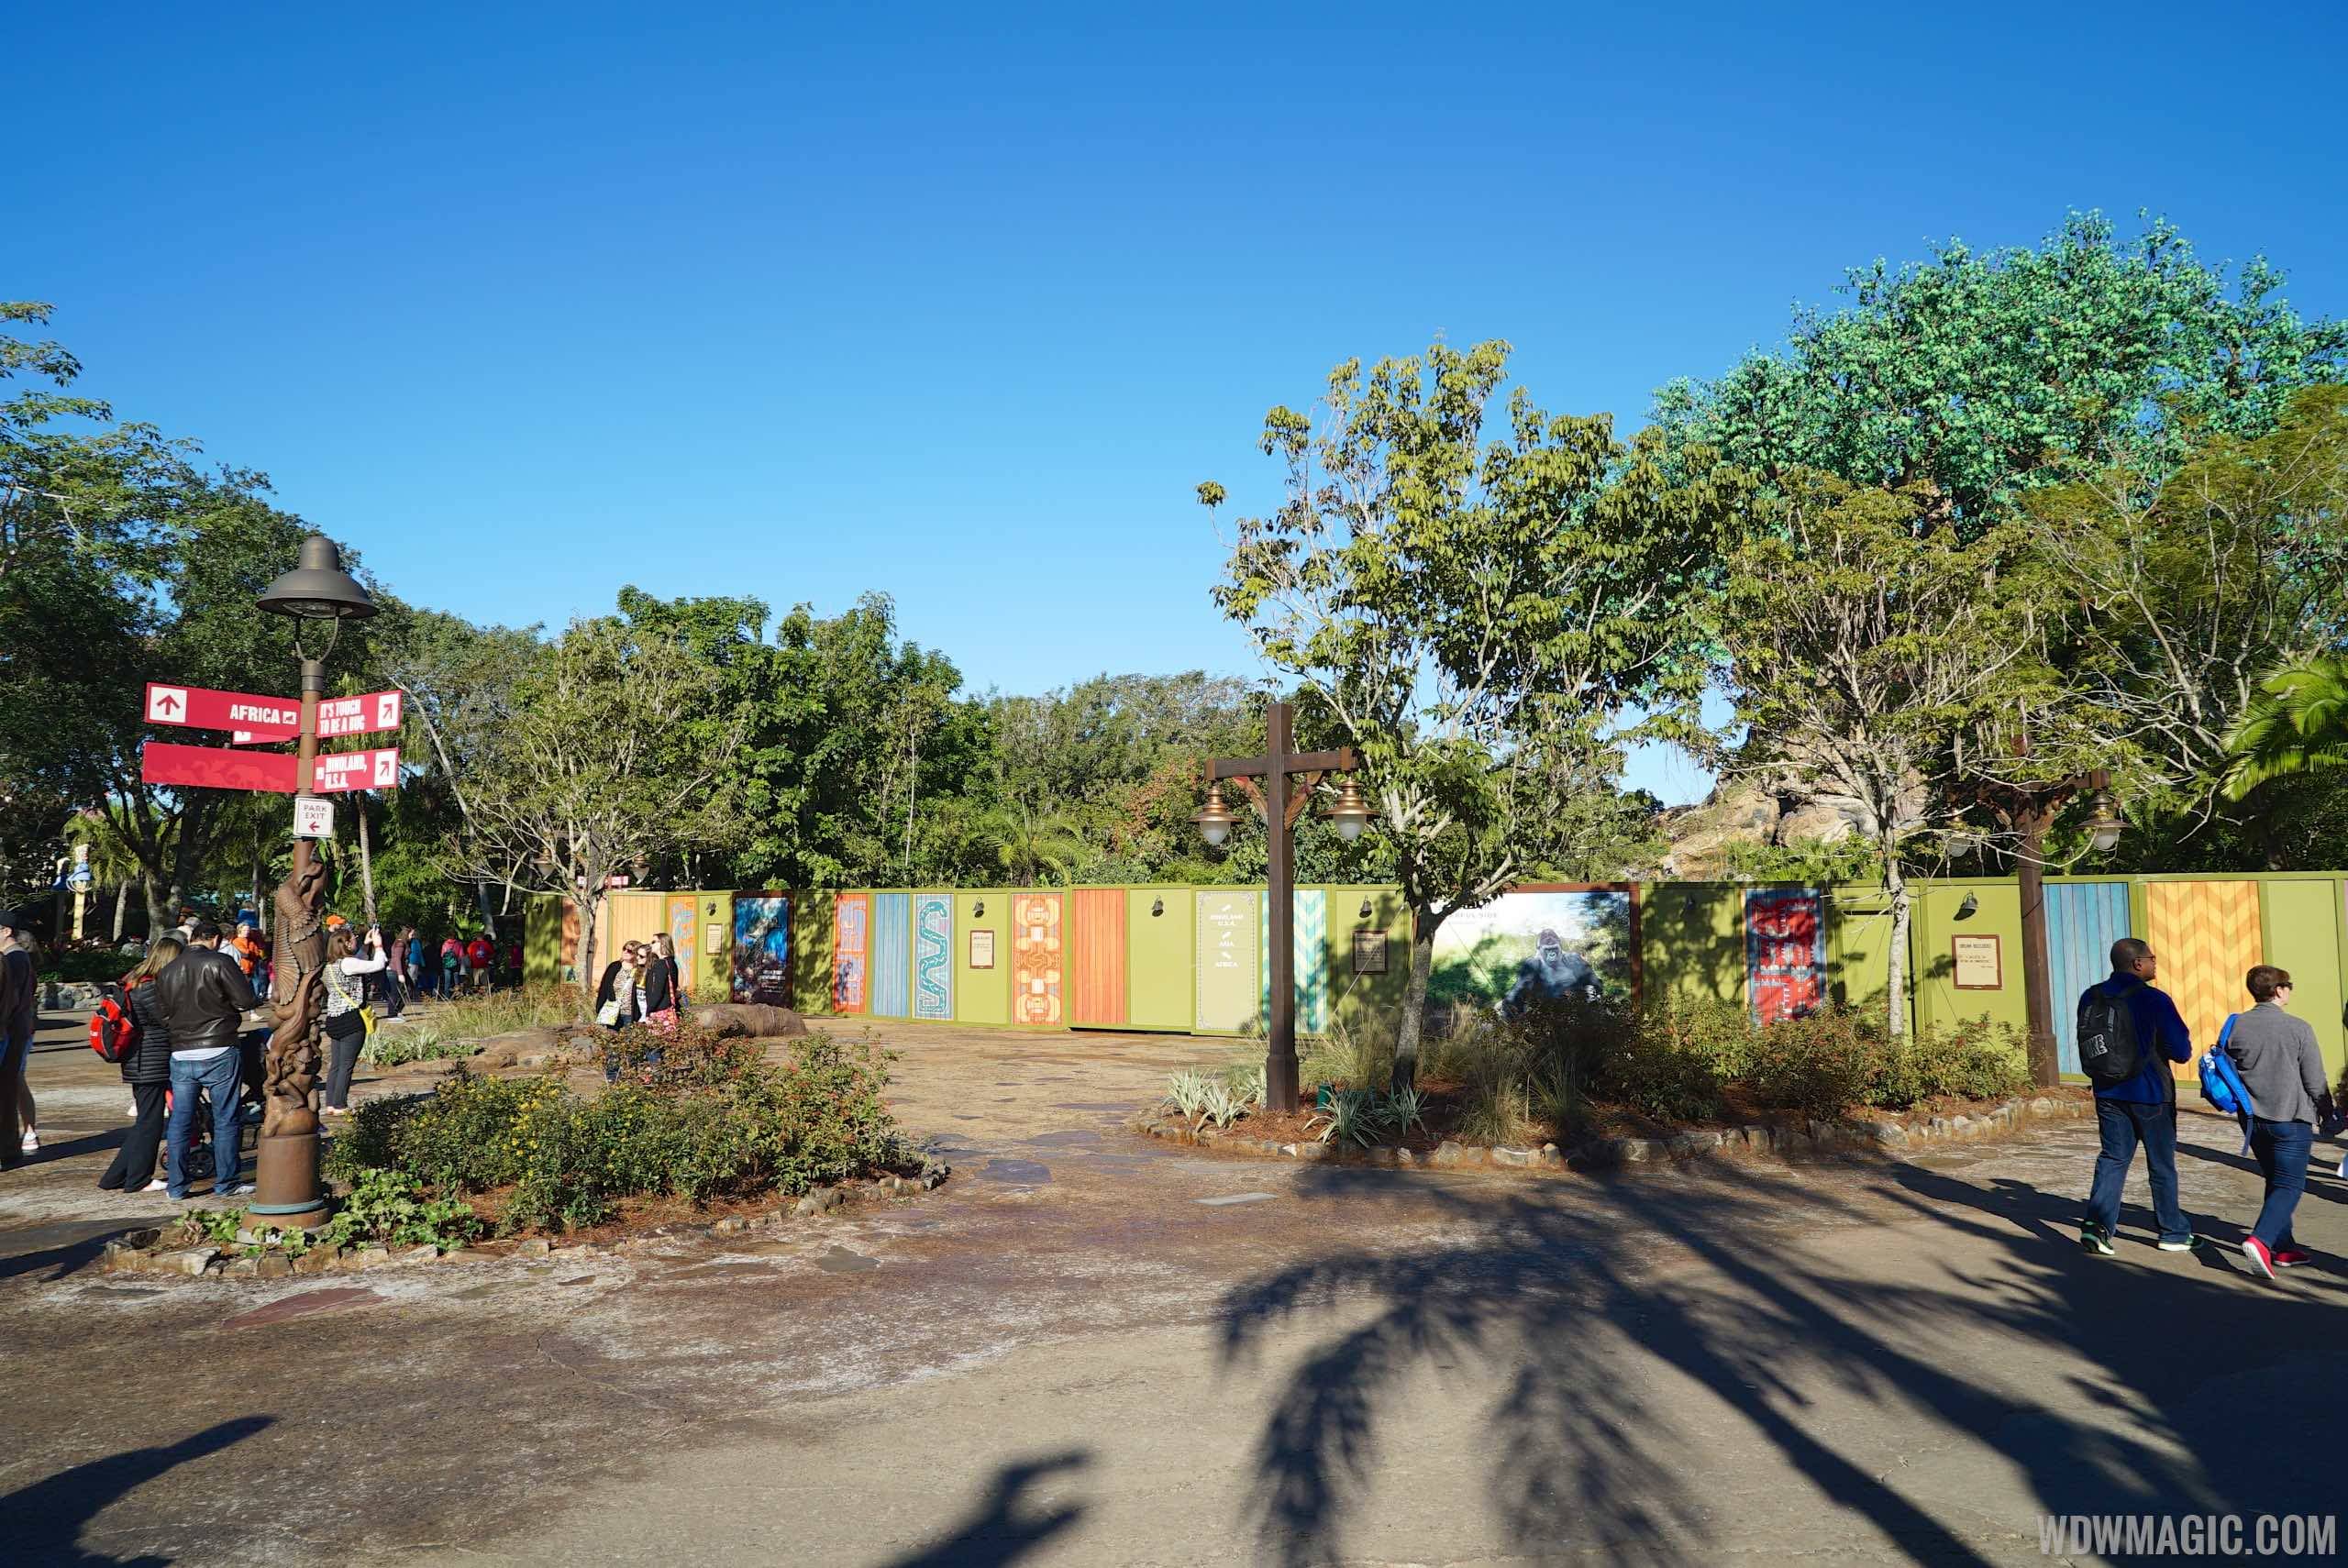 PHOTOS - Expanded area in-front of the Tree of Life opens at Disney's Animal Kingdom 